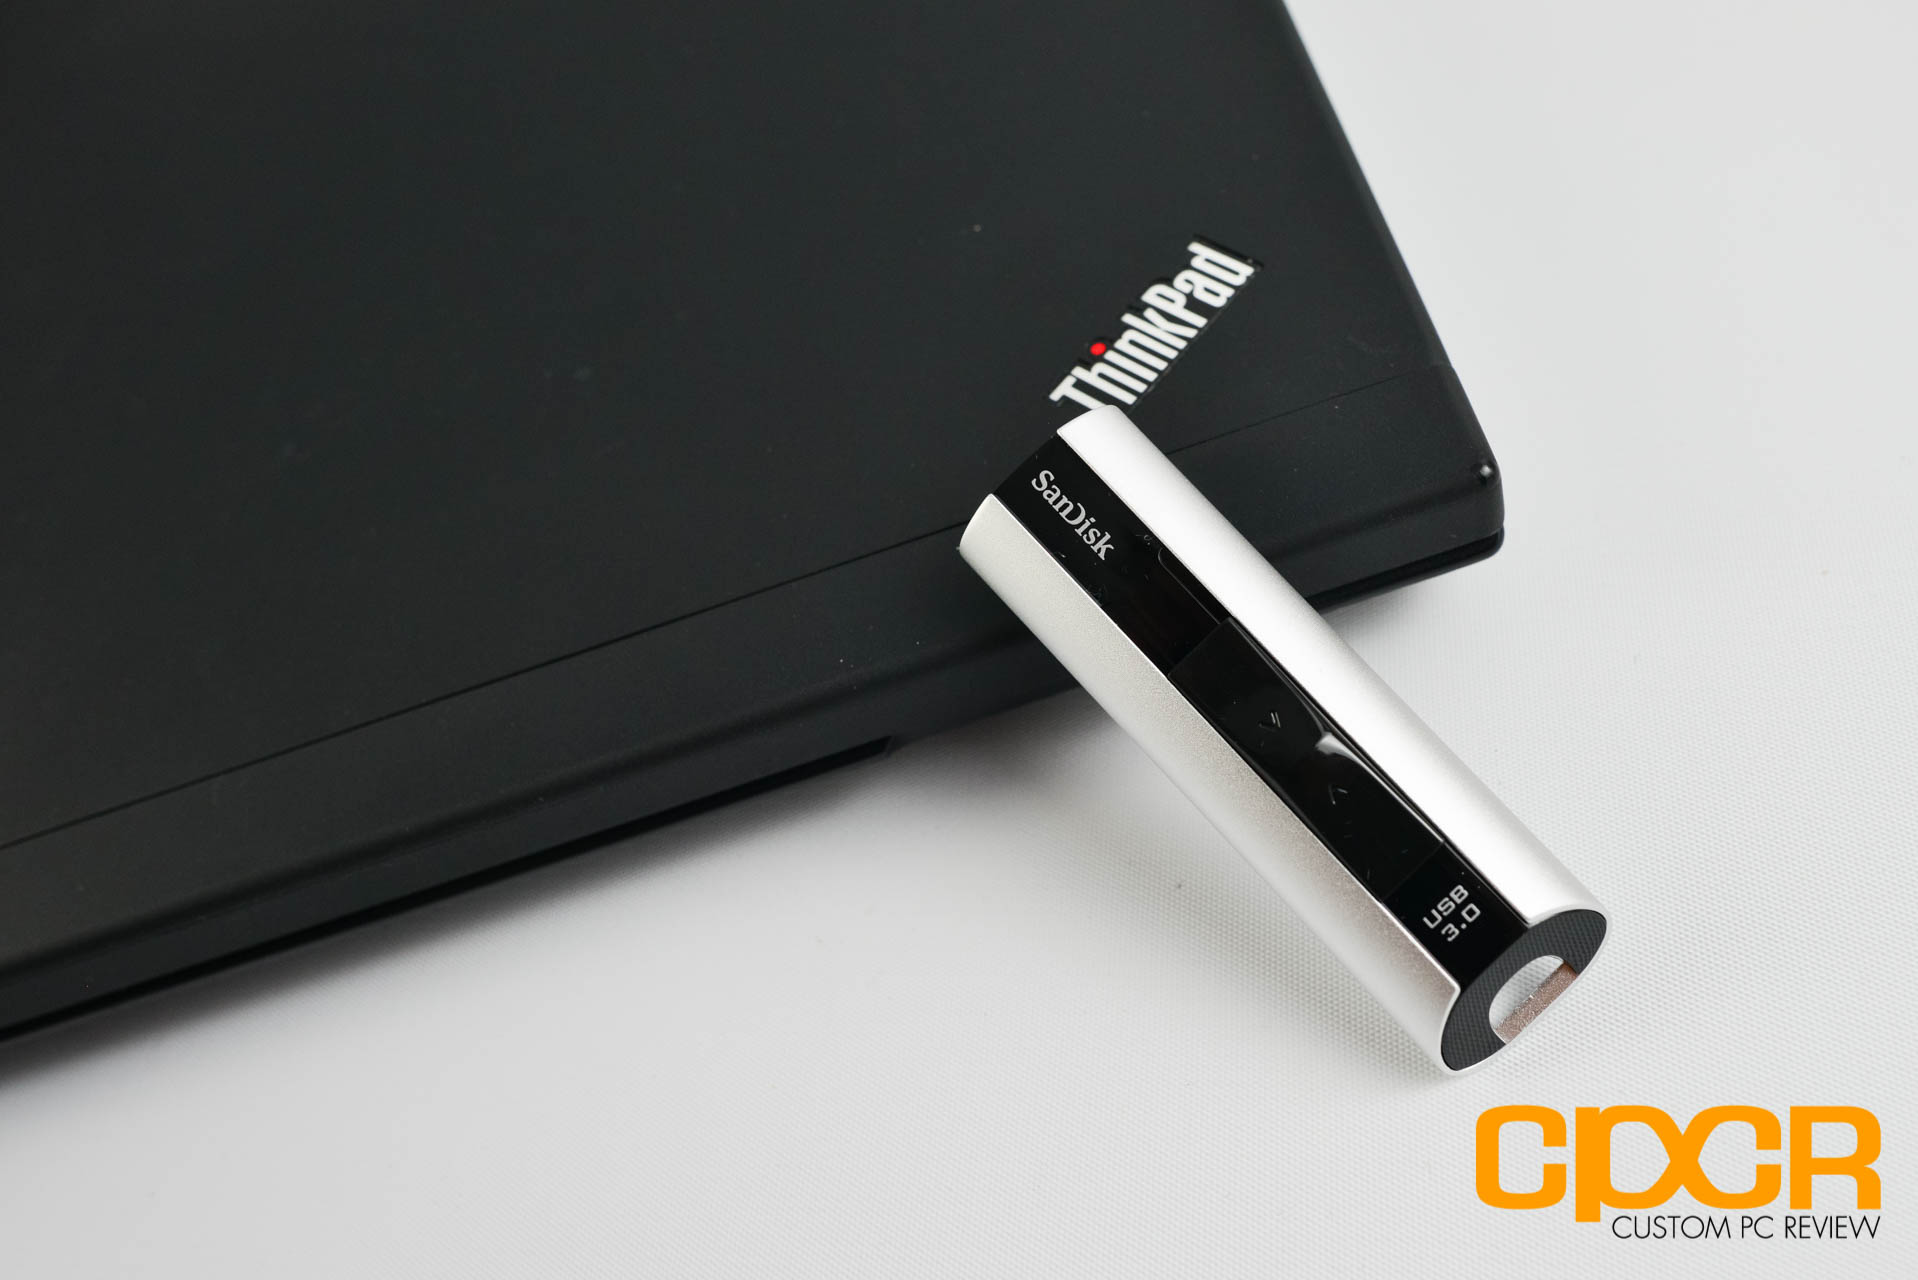 Review: SanDisk Extreme PRO 128GB USB 3.0 Flash Drive